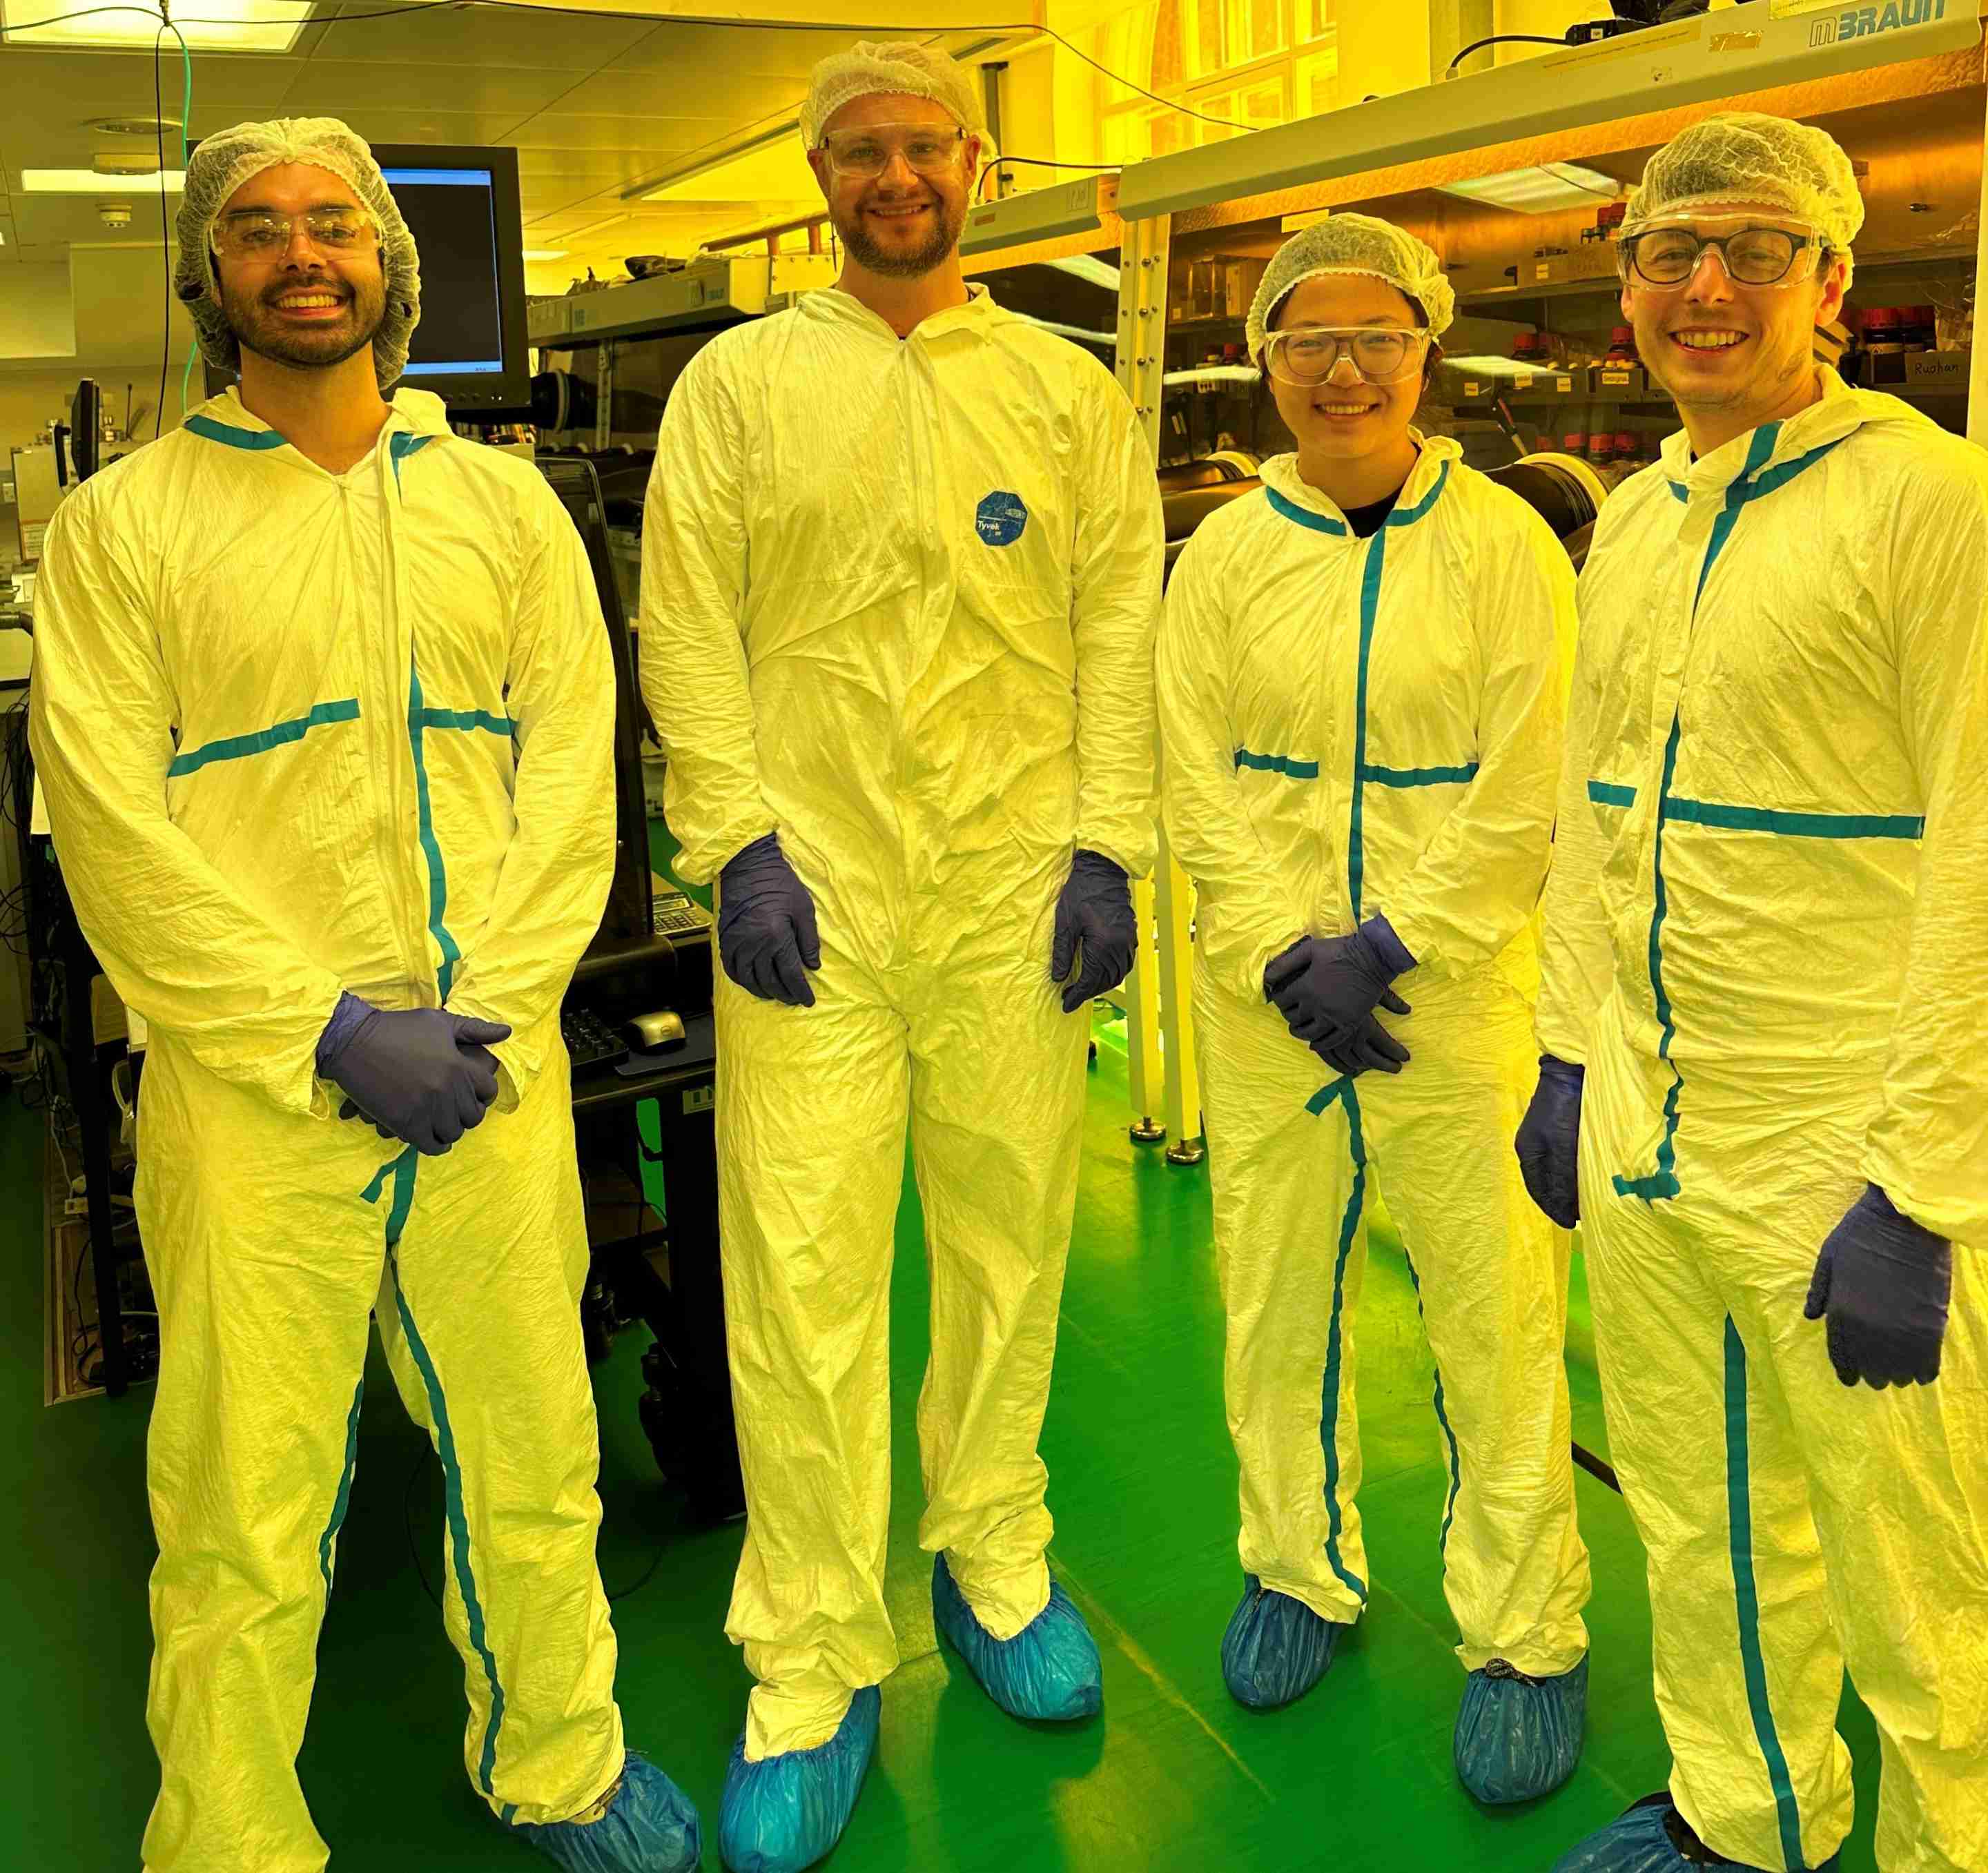 Boer (second from right) is pictured in a laboratory at the University of Oxford